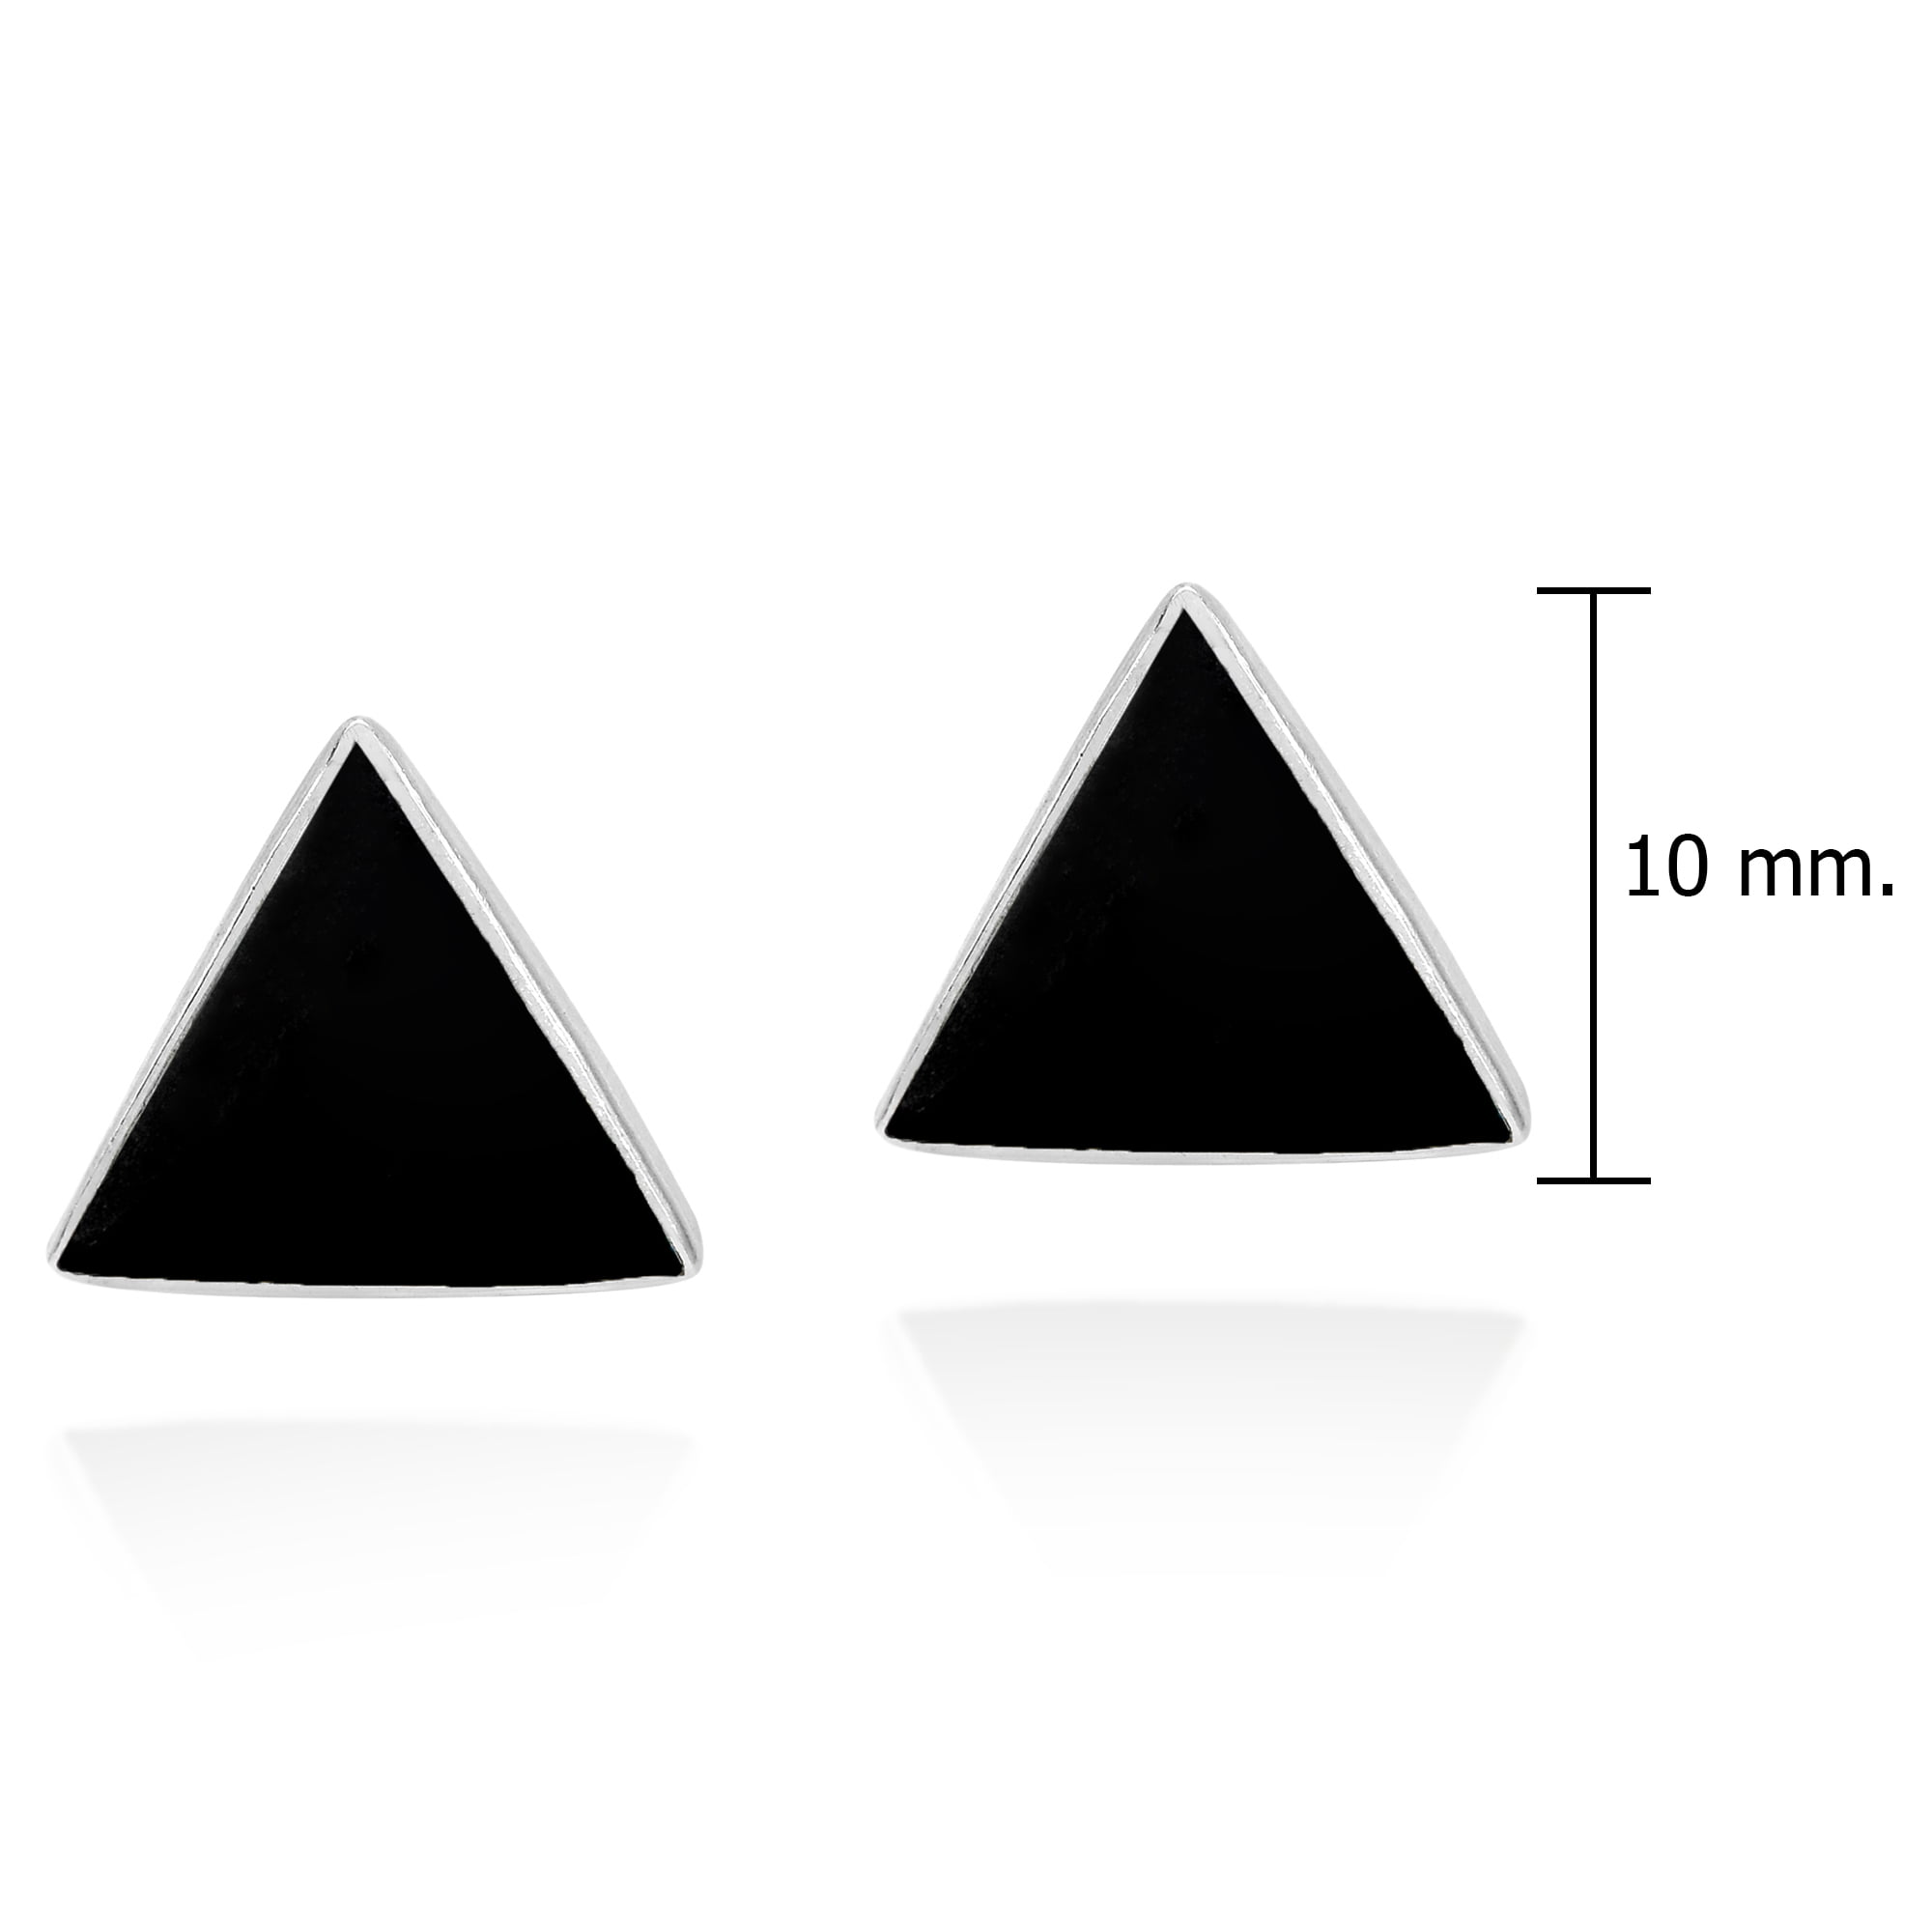 Black Onyx in Triangle 925 Sterling Silver Square Earrings 